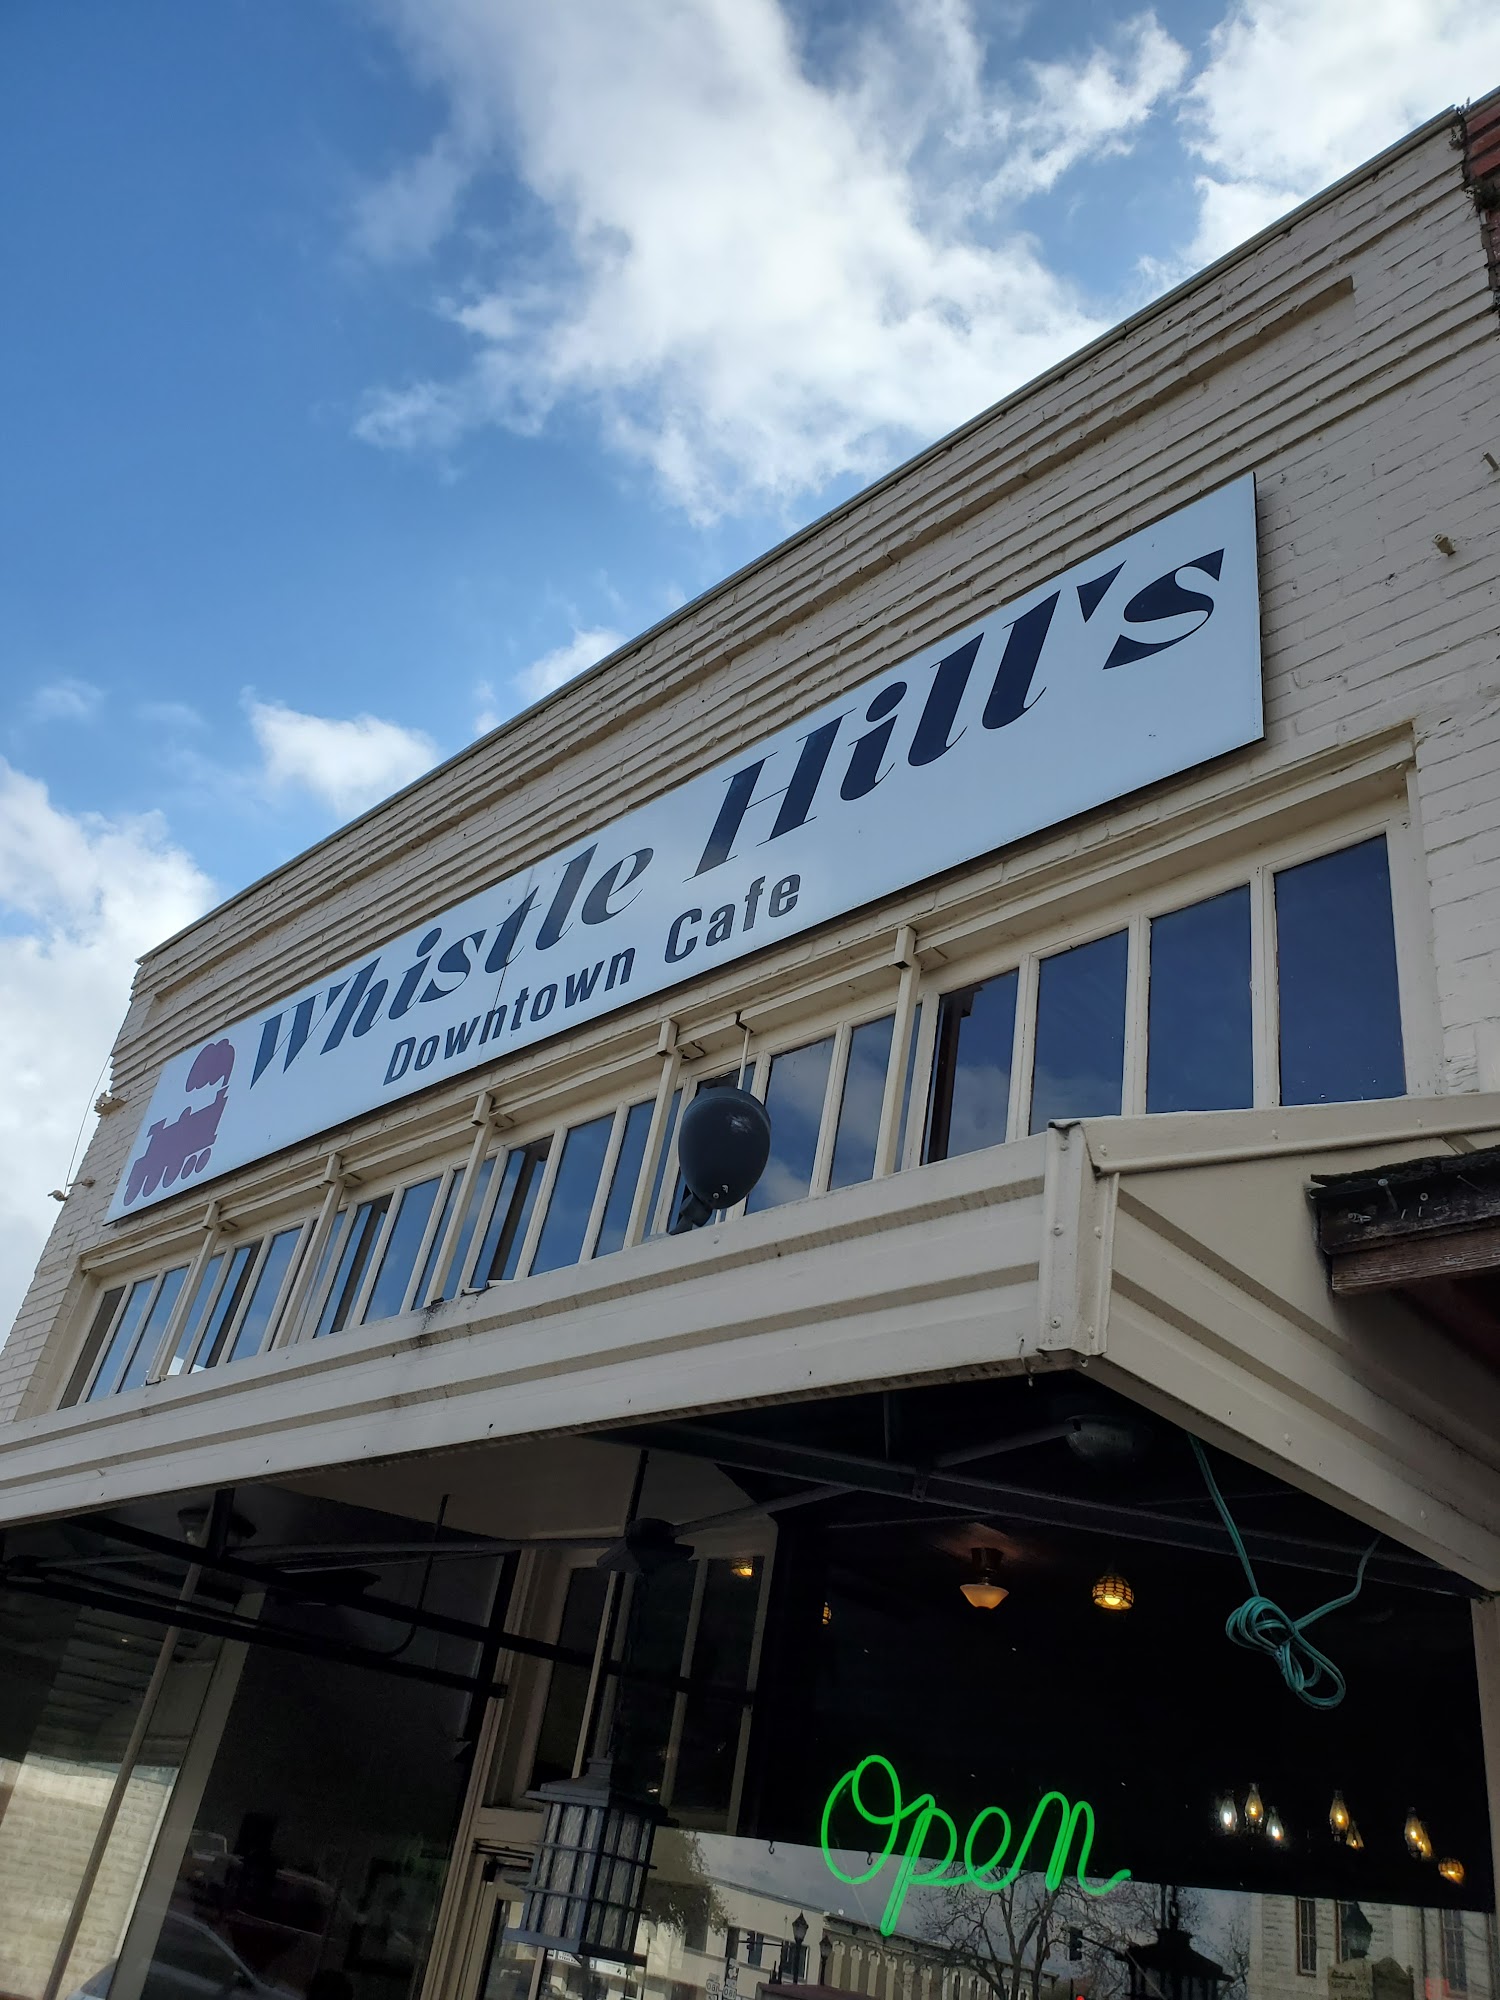 Whistle Hill's Downtown Cafe